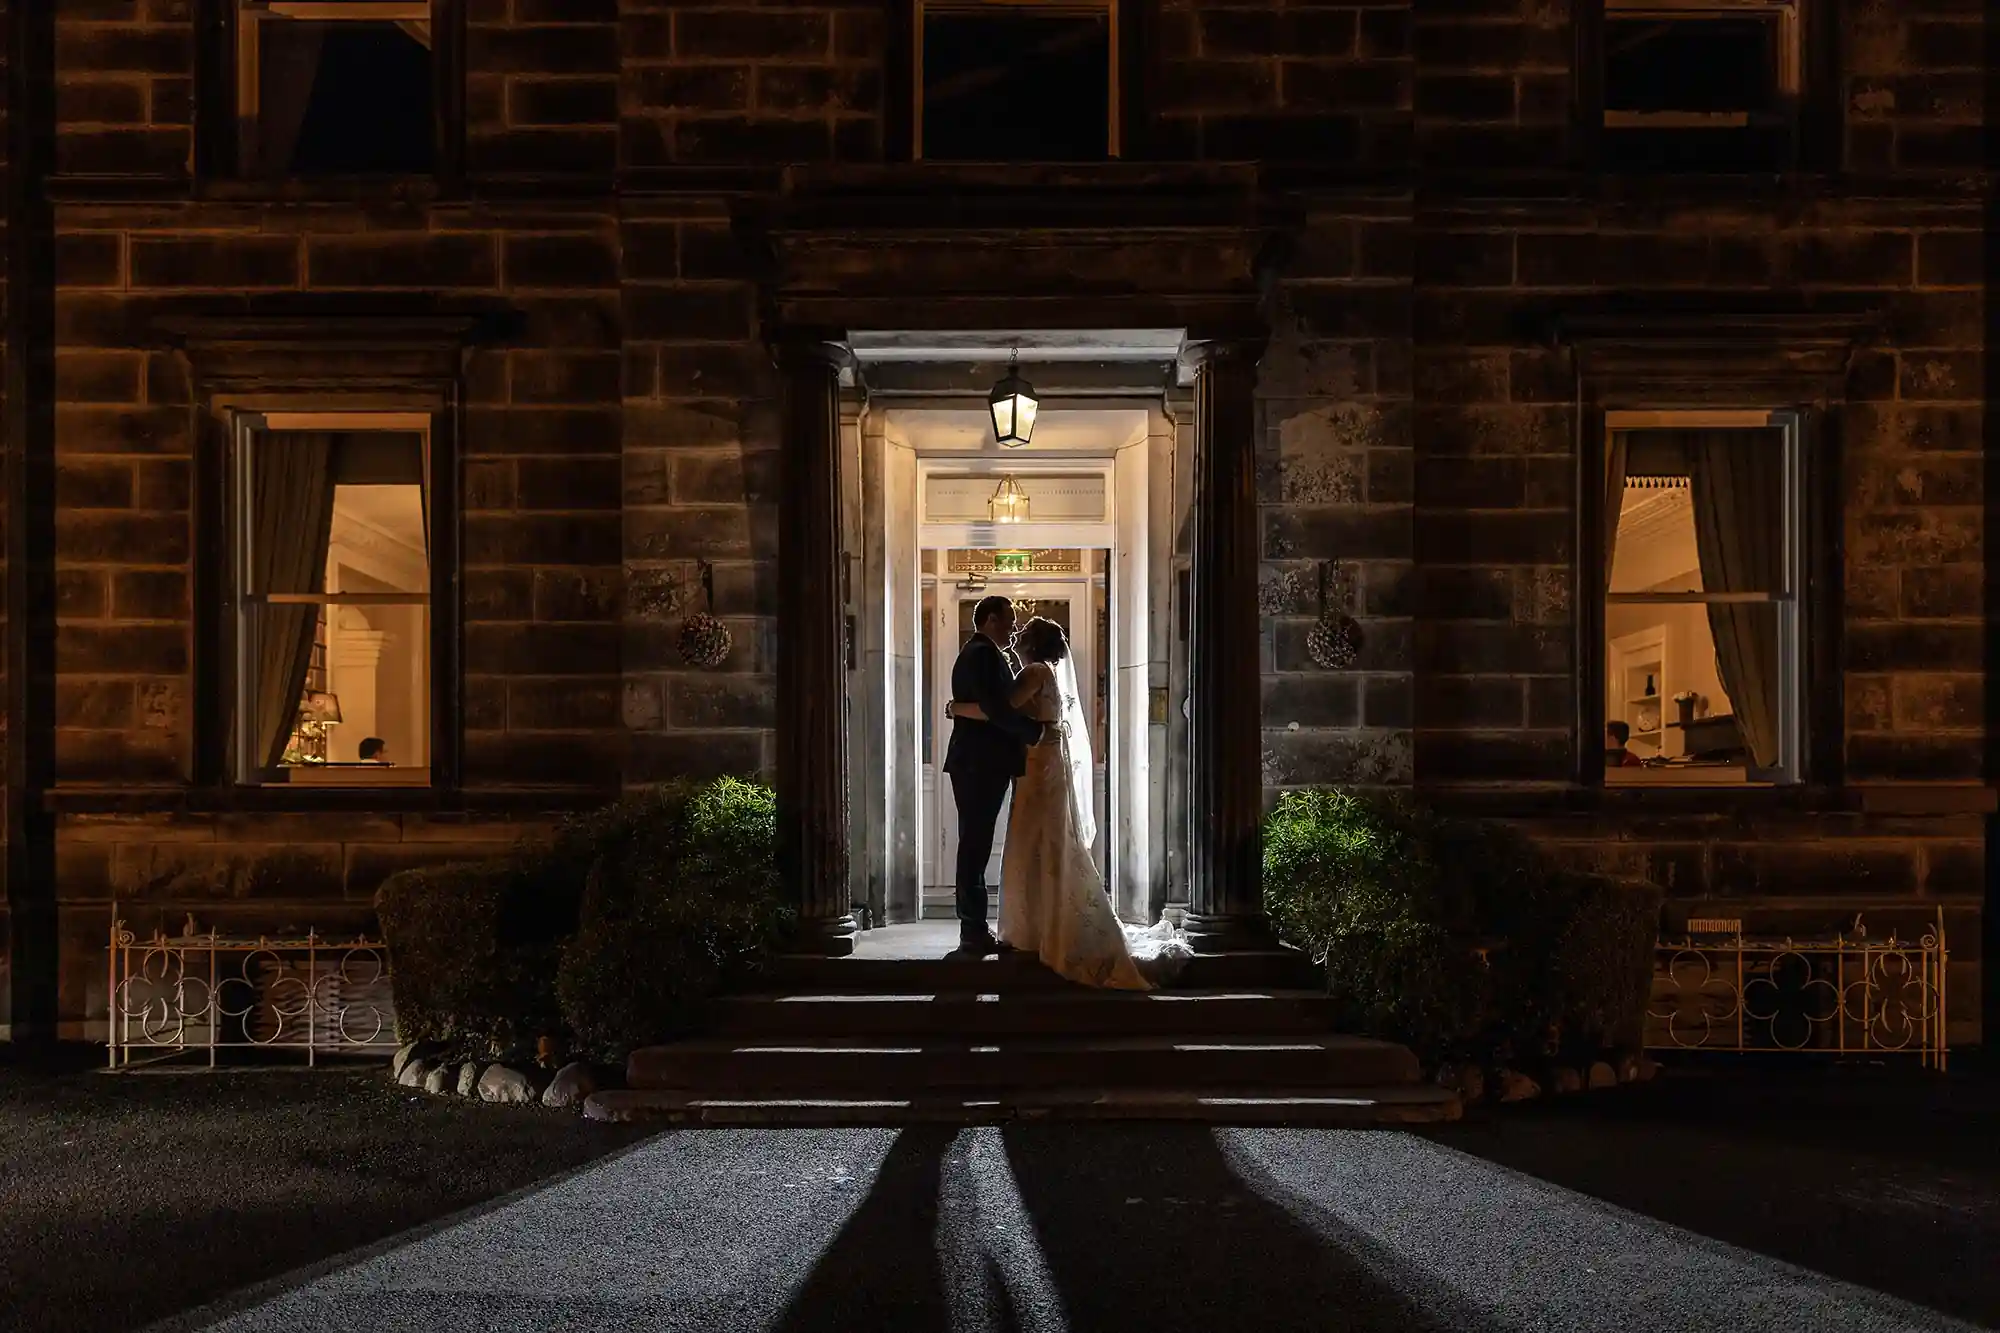 A newlywed couple embracing at the illuminated entrance of a stone building at night.